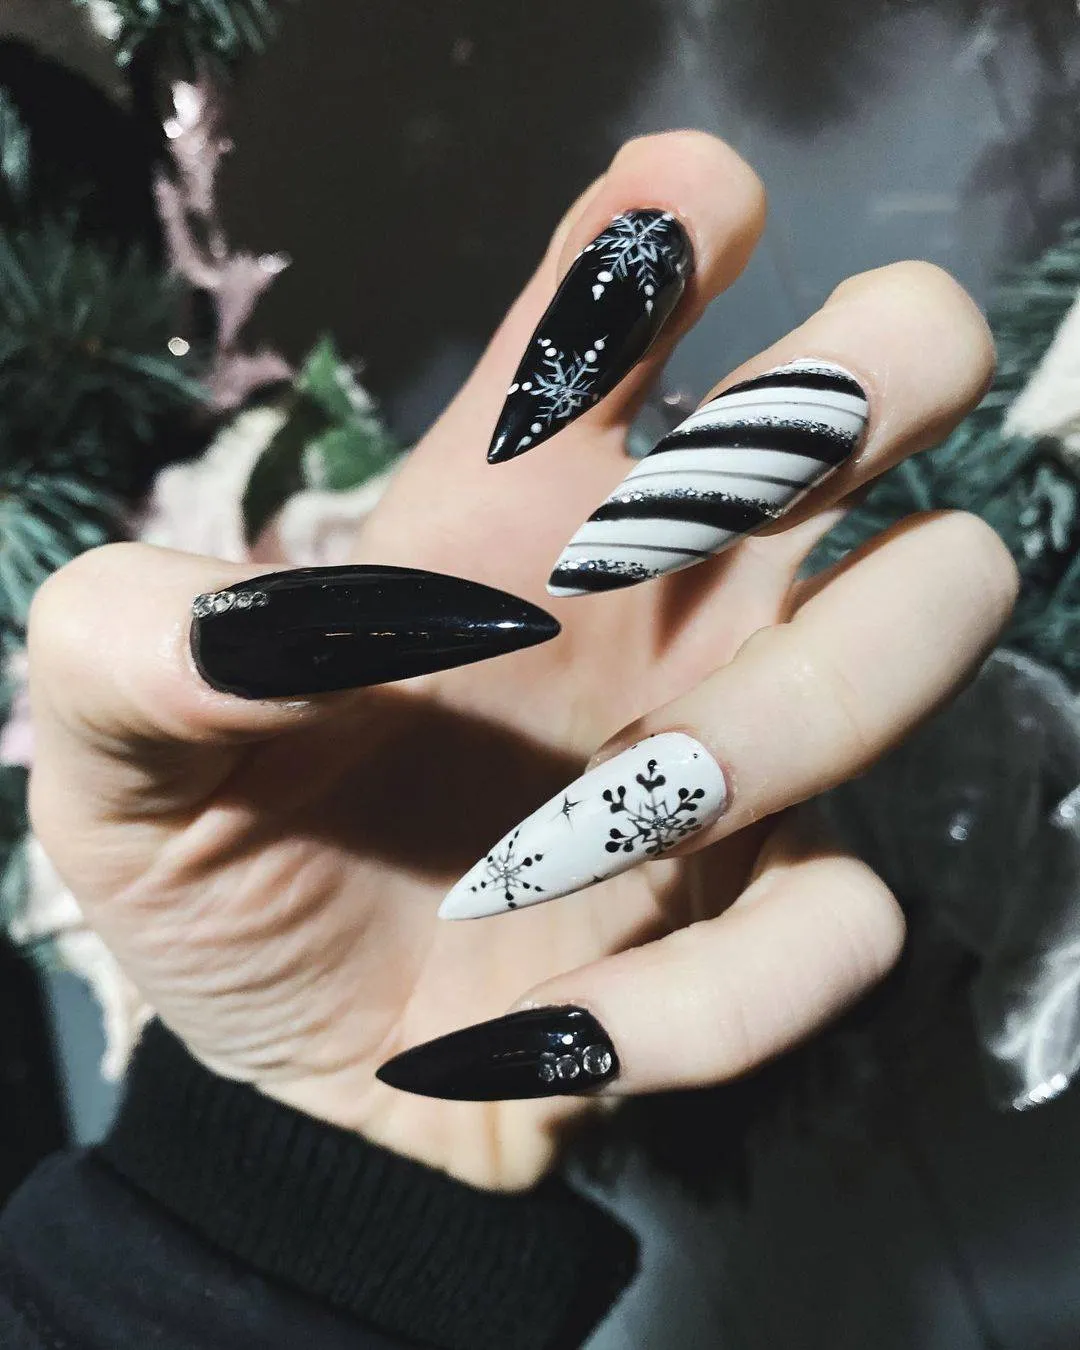 45 Cool Matte Nail Designs to Copy in 2019 - StayGlam